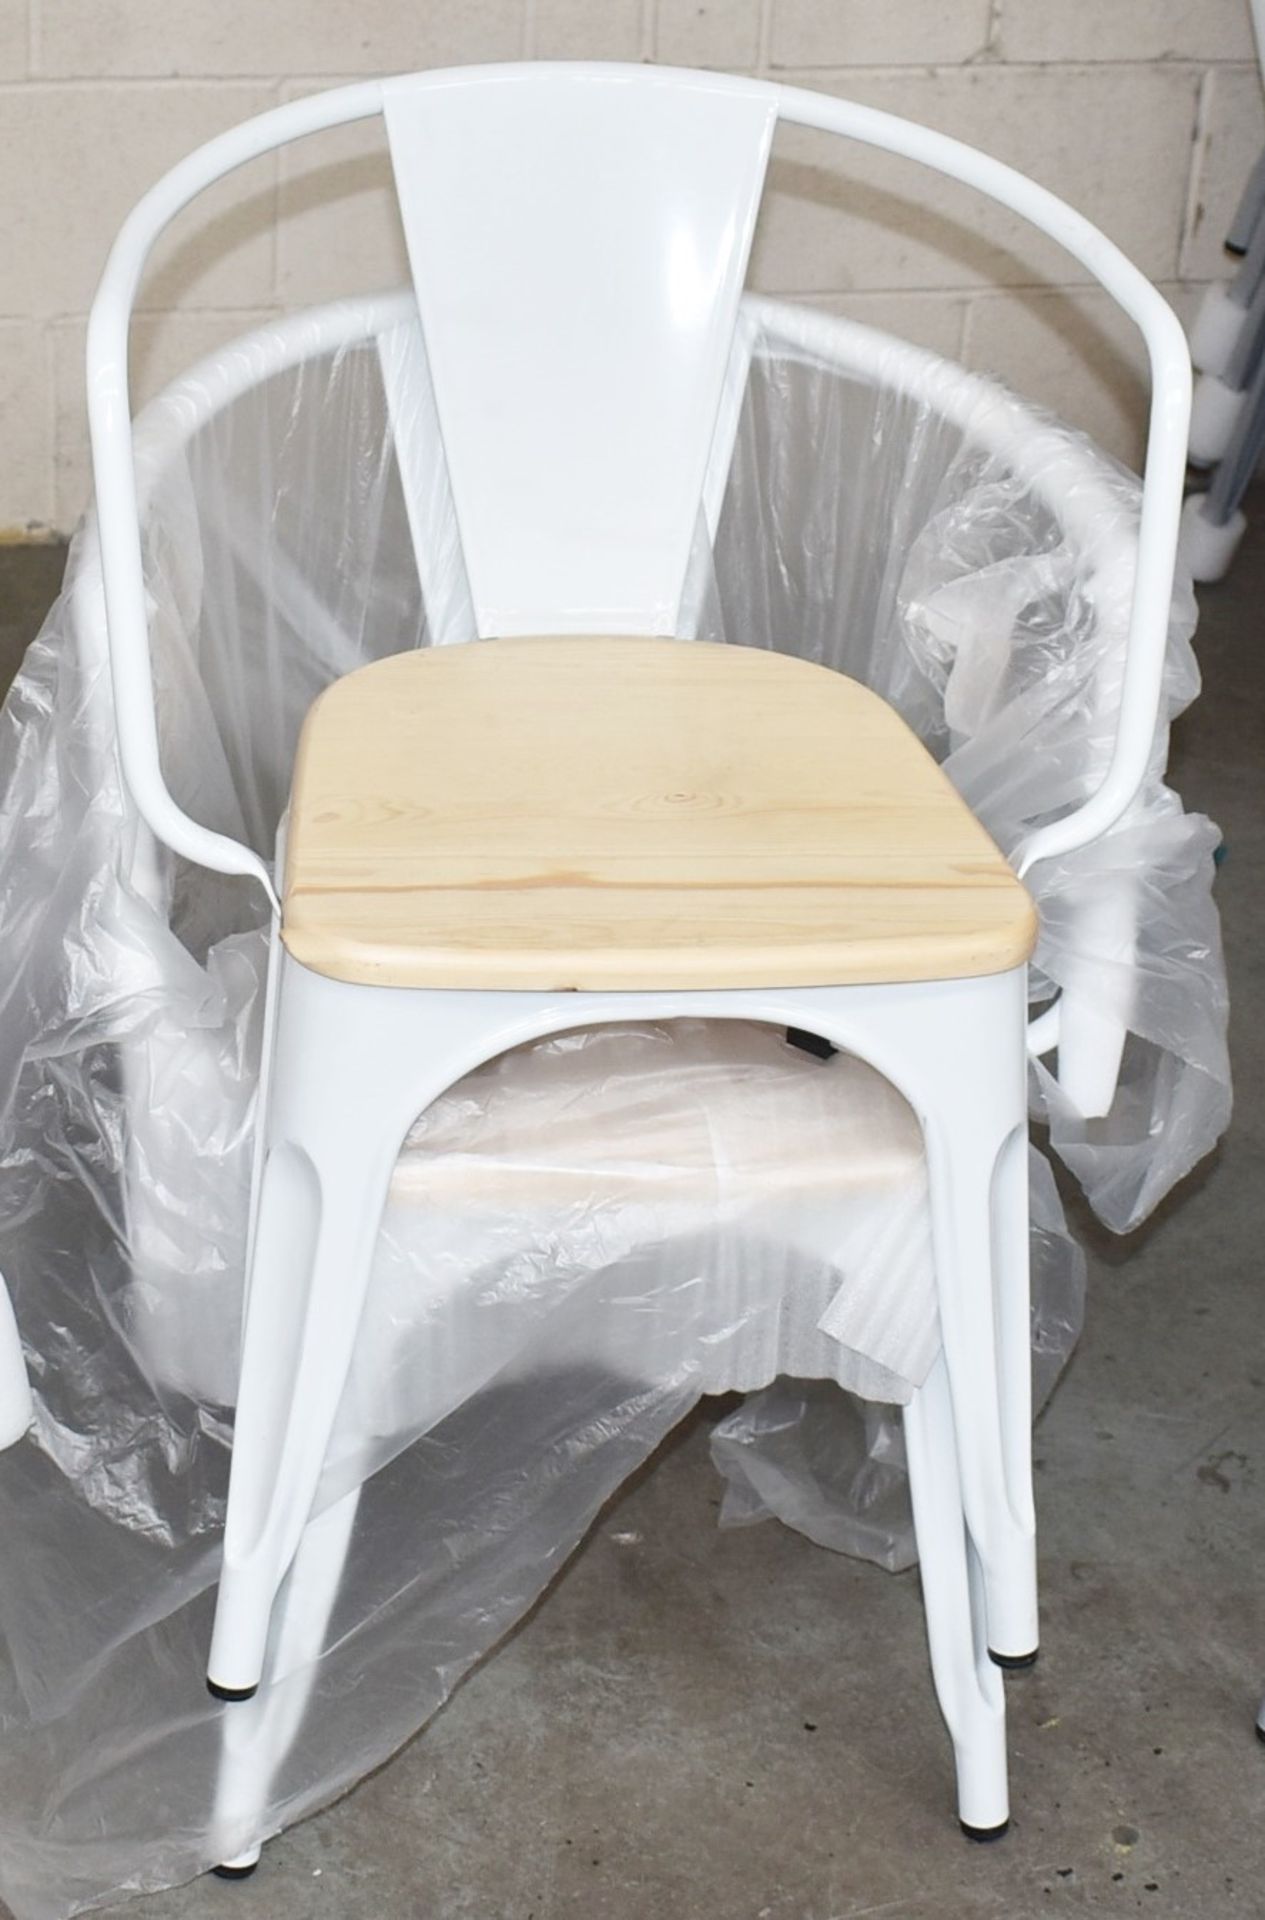 4 x Industrial Tolix Style Stackable Chairs With Armrests and Wooden Seats - Finish: WHITE/PINE - - Image 5 of 5